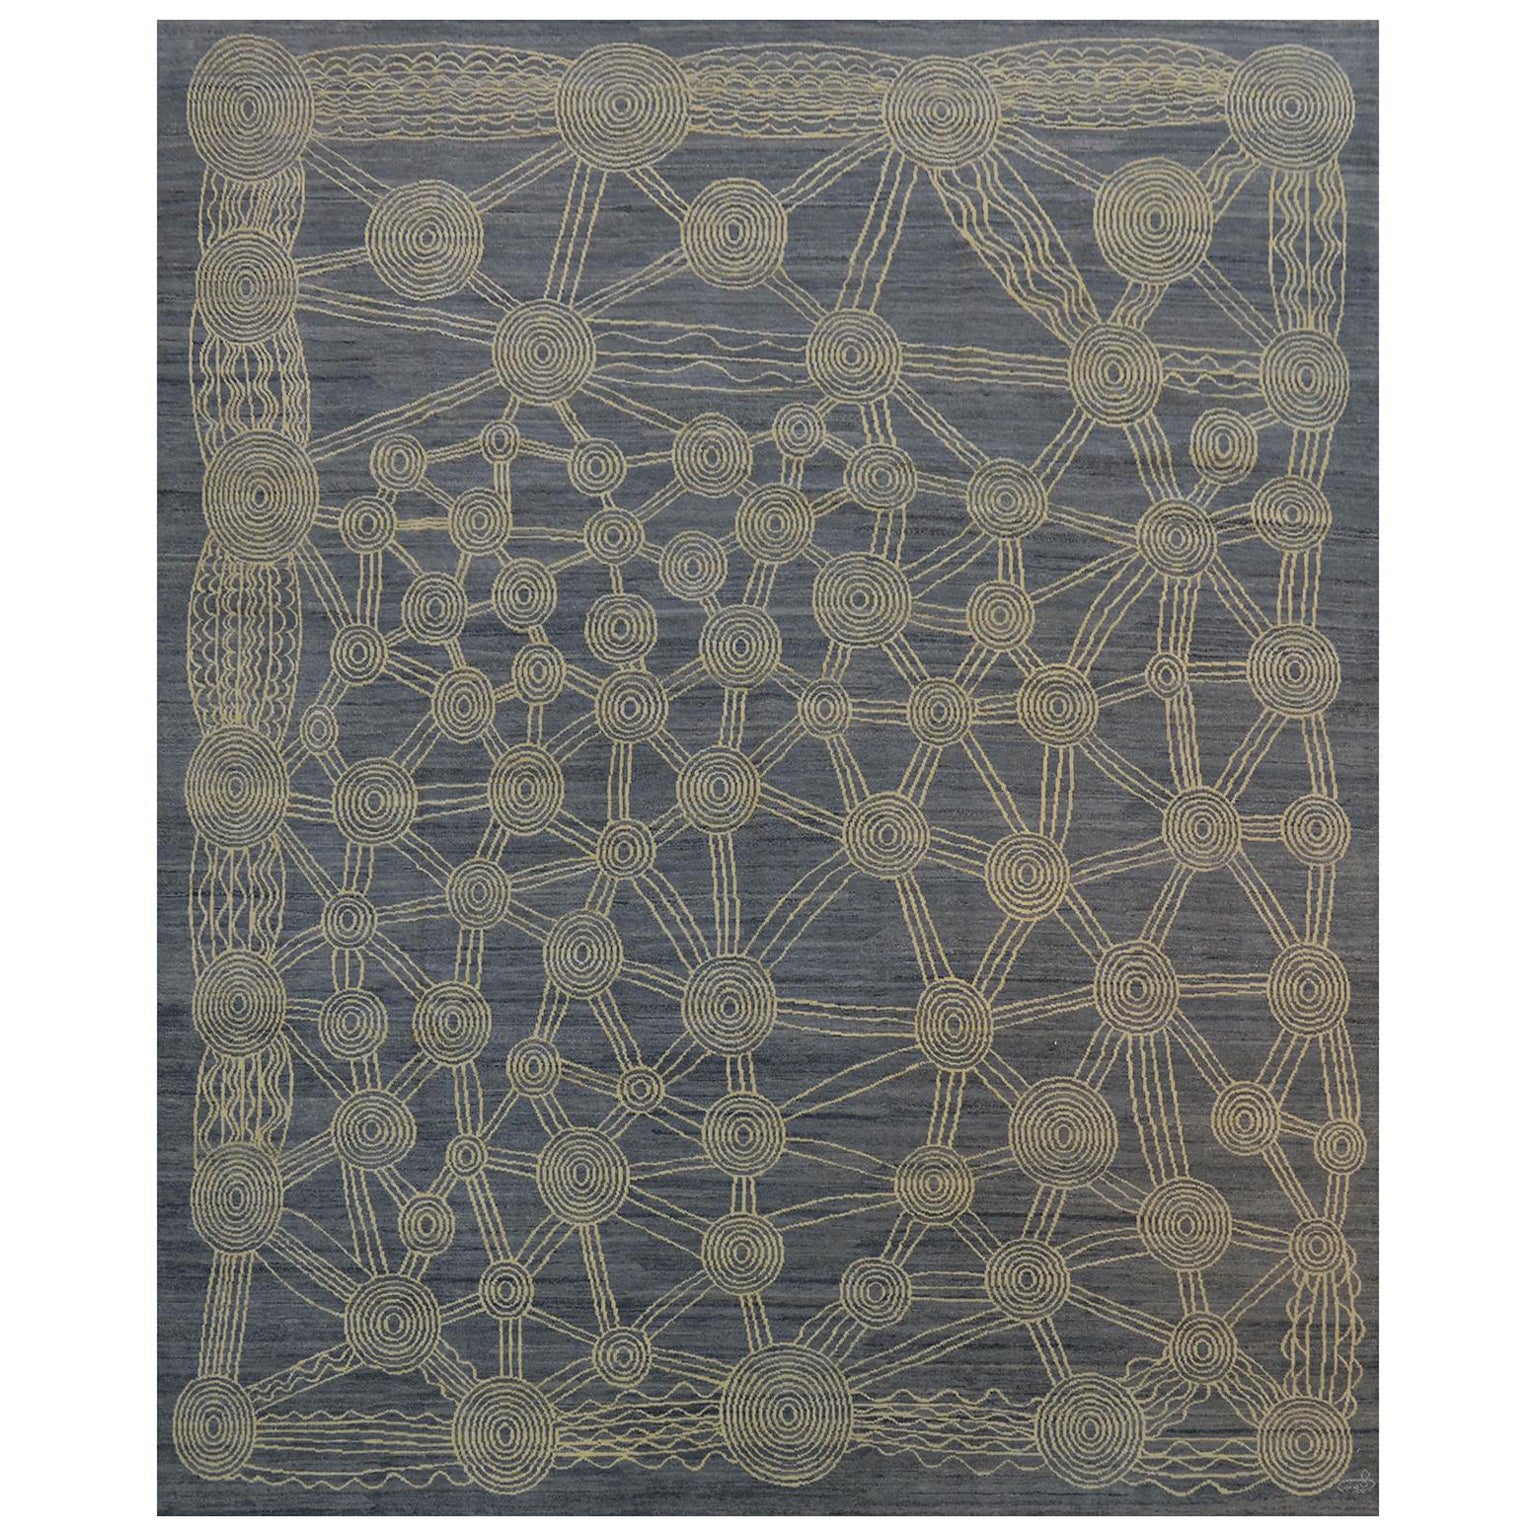 Contemporary Wool Persian Rug in Grau und Creme, Orley Shabahang, 8' x 10'